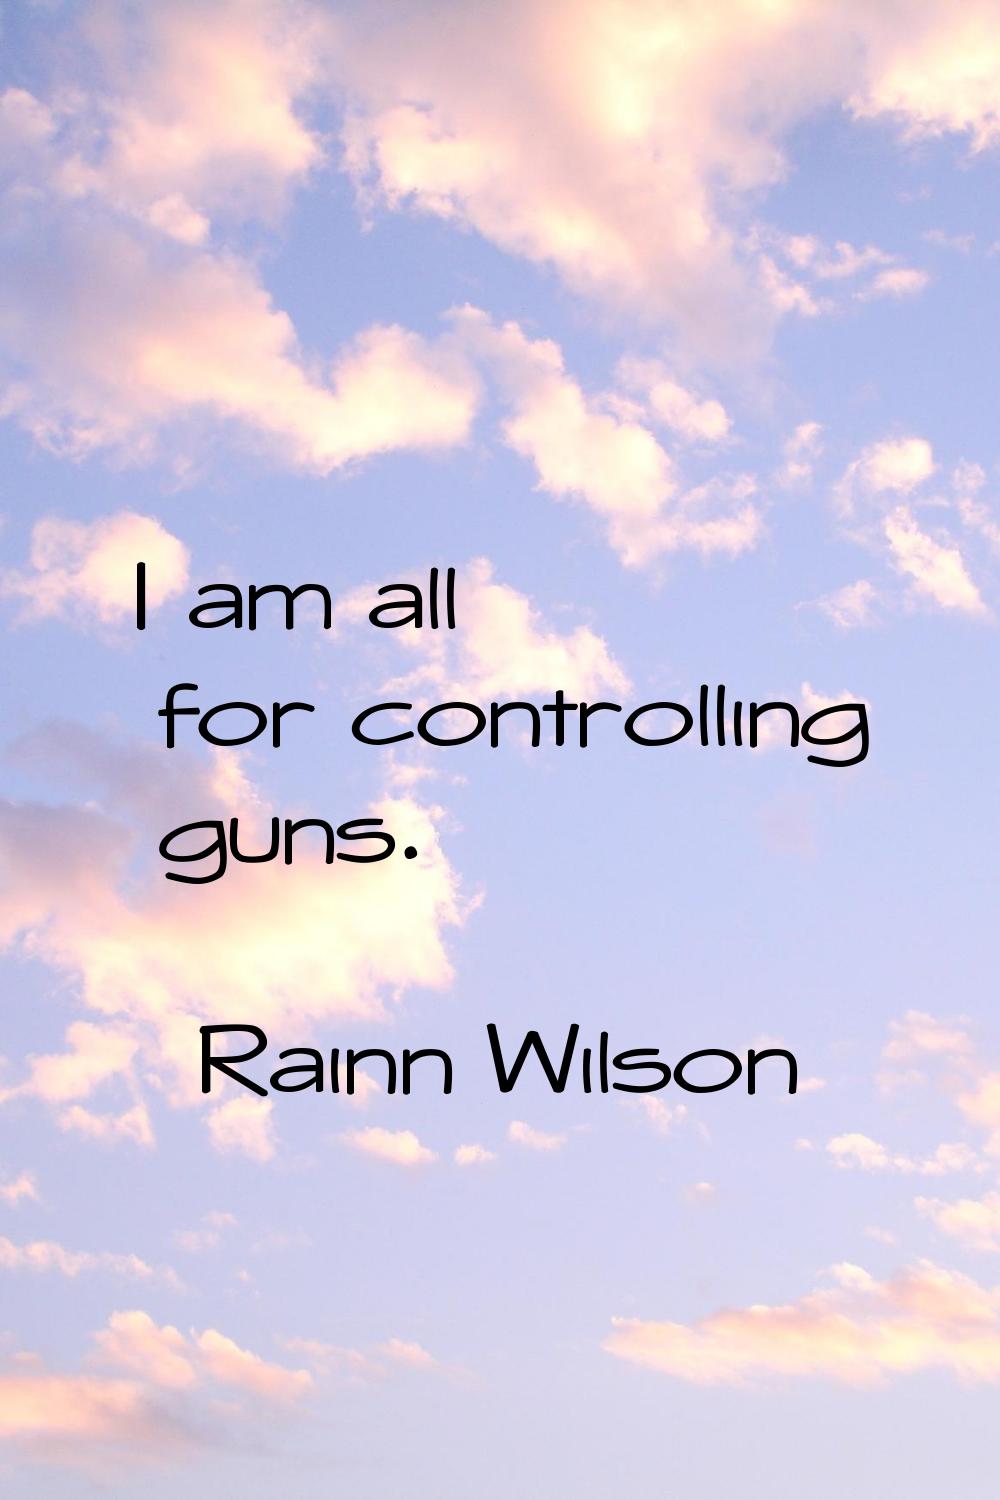 I am all for controlling guns.